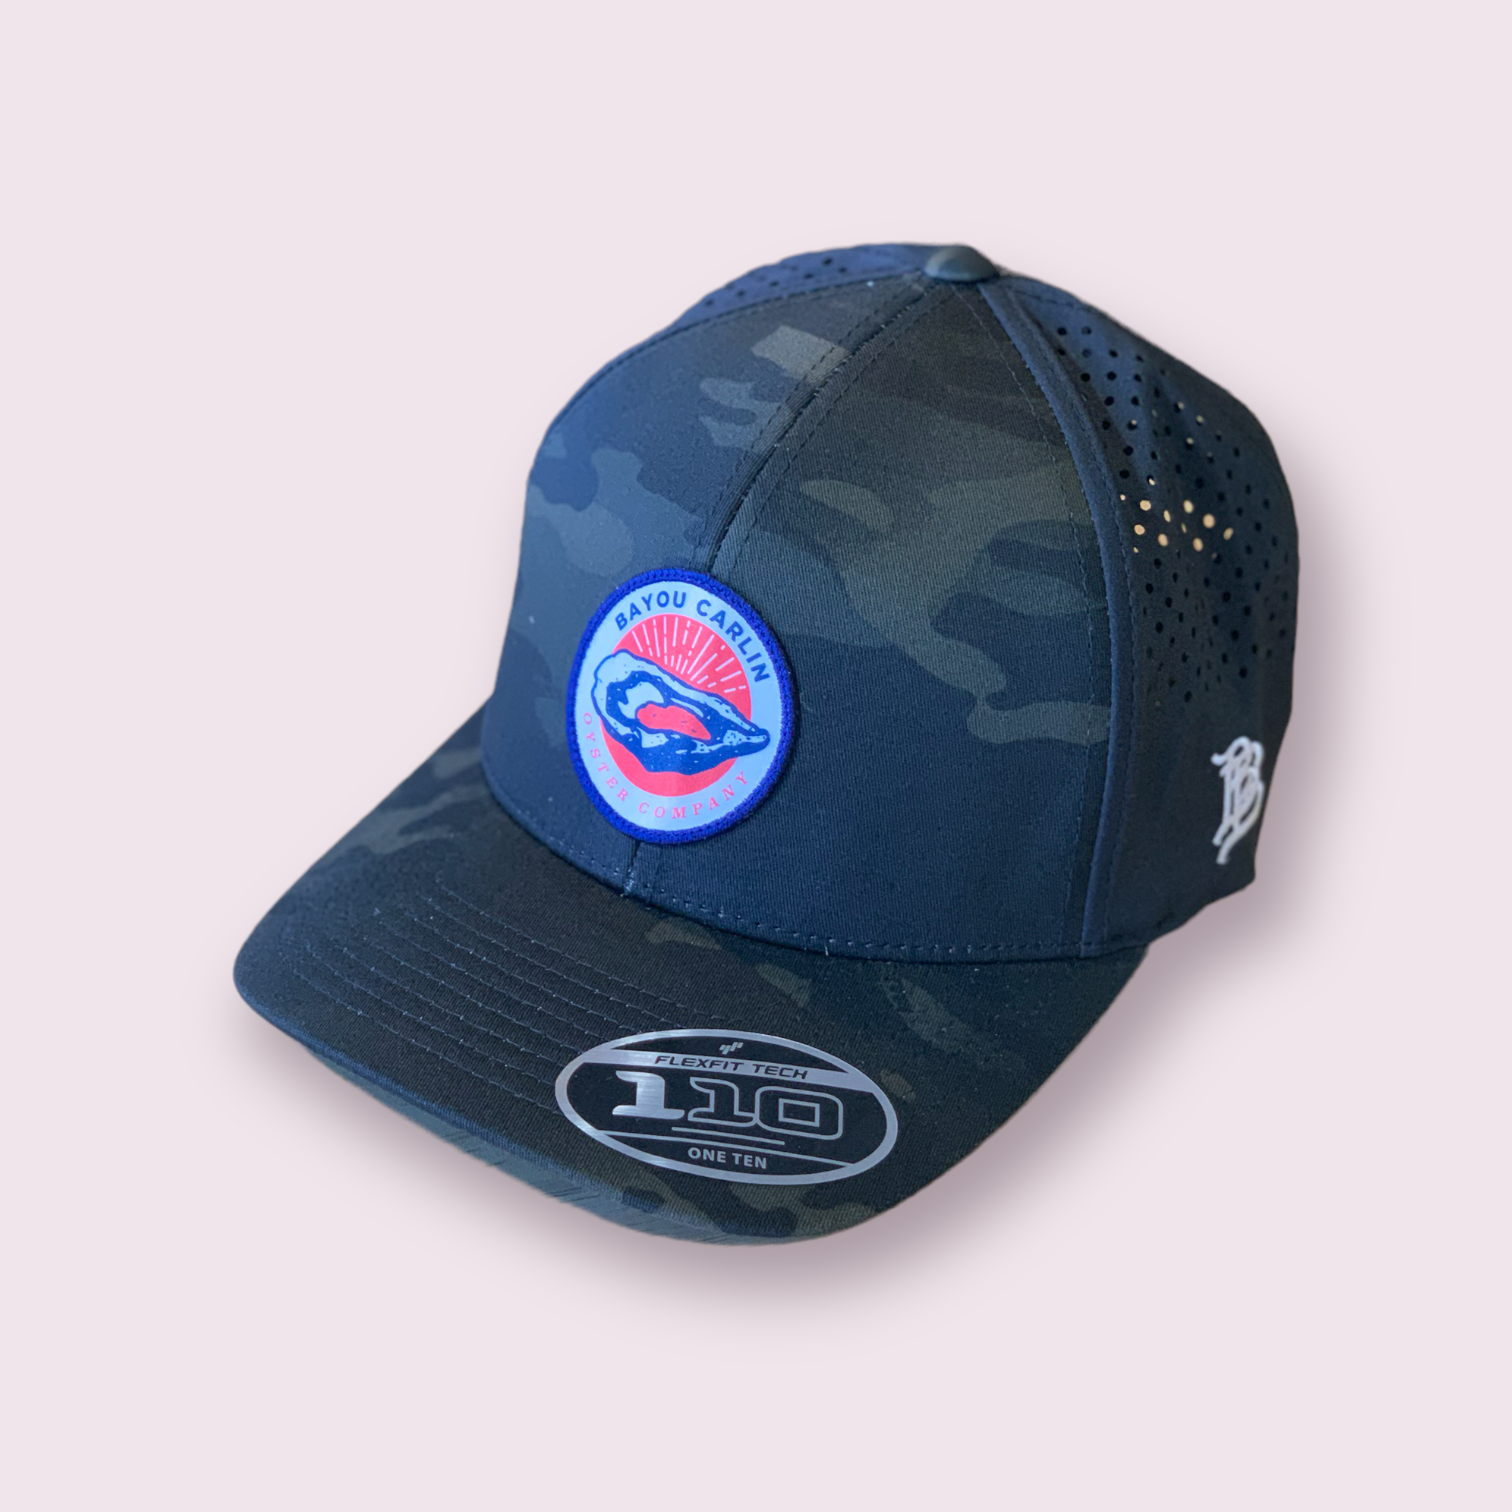 Black Patch – - Oyster MultiCa Carlin Bayou Logo Trucker Hat Sublimated Performance - Curved